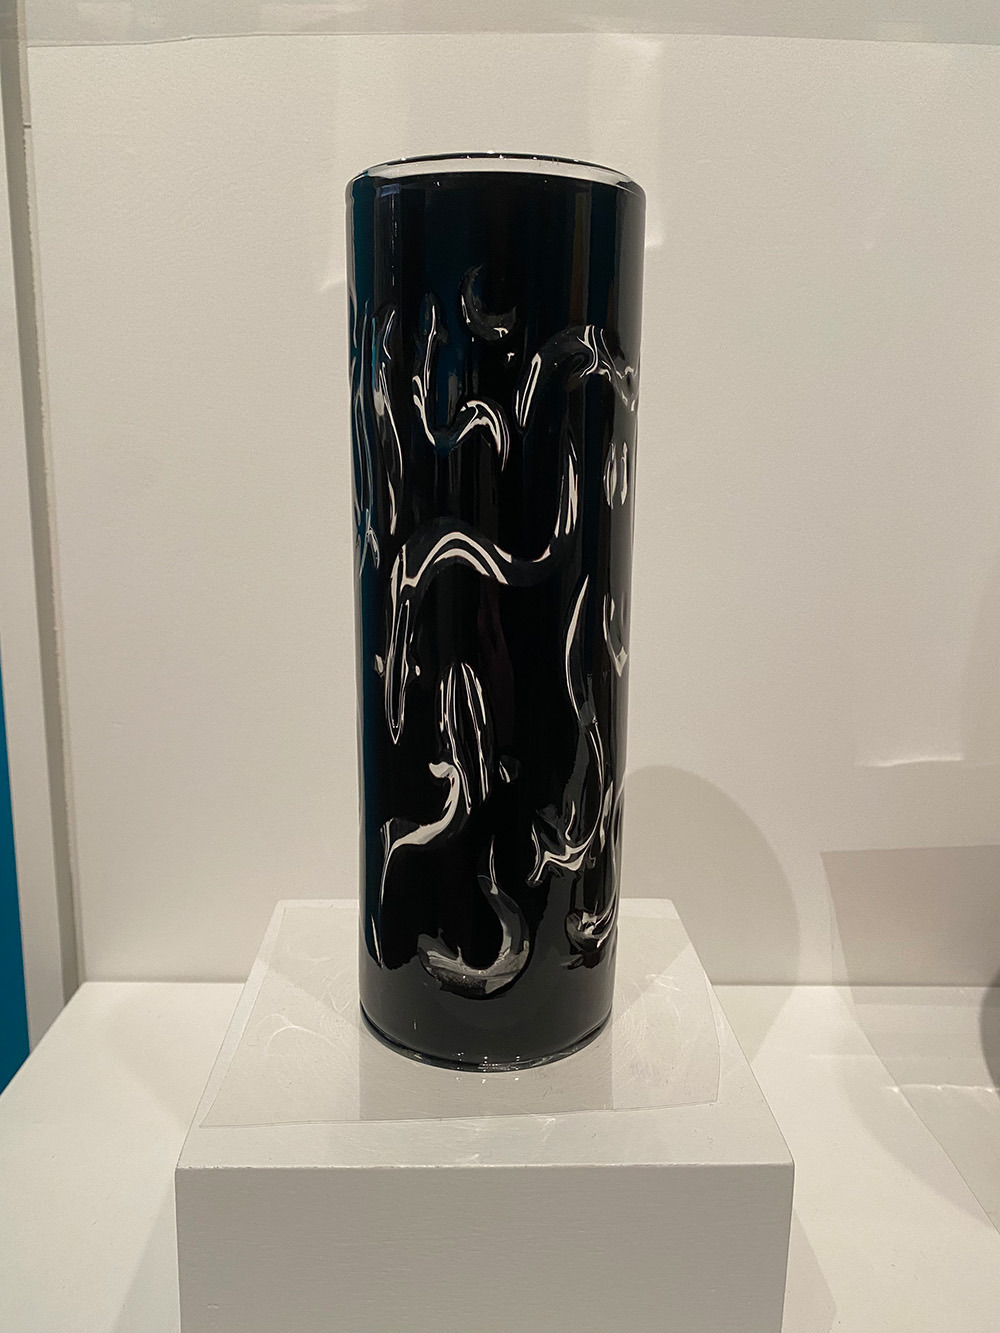 Ngā Tuna Heke (Migrating Eels) is a three-dimensional vessel crafted from blown glass into a tall and slim cylindrical form